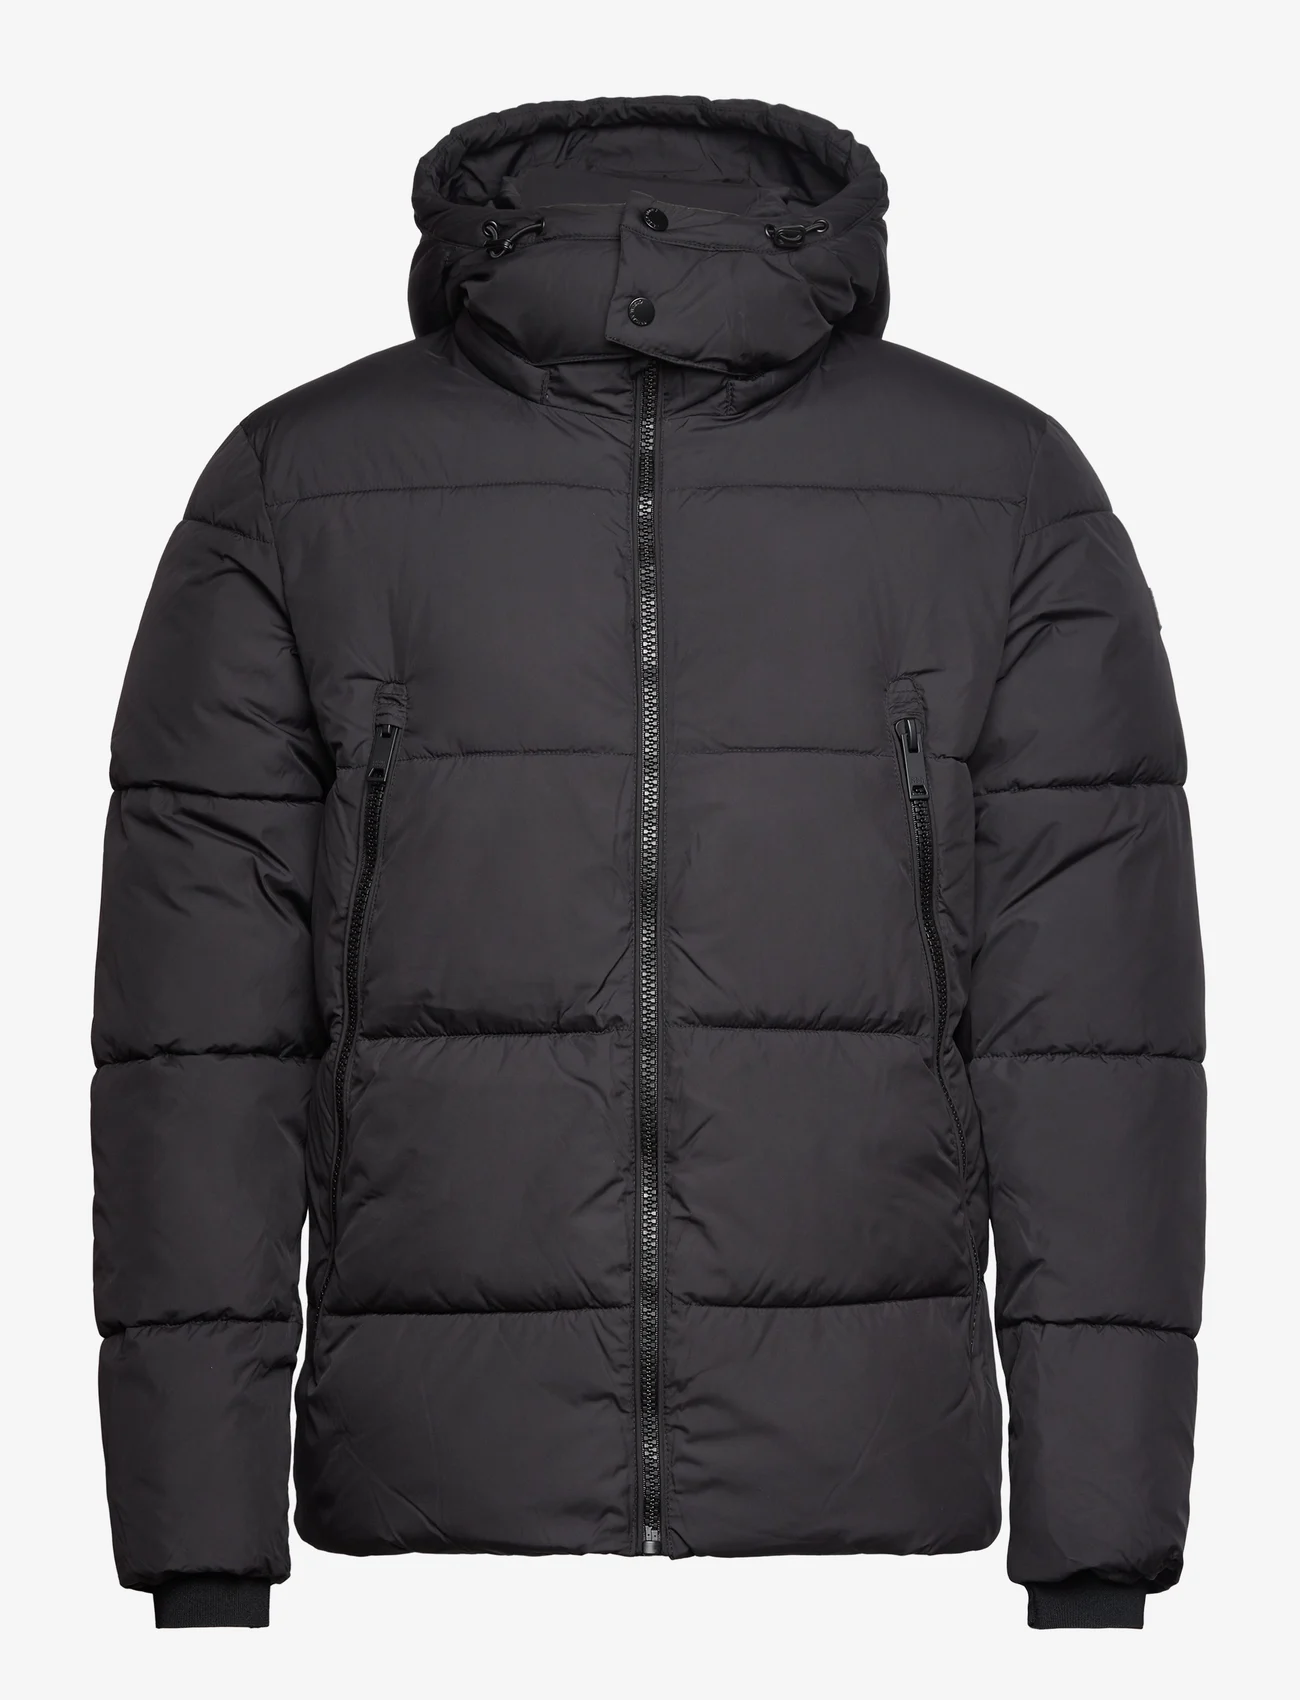 Casual Friday - CFWilson 0085 short puffer jacket - winter jackets - anthracite black - 0